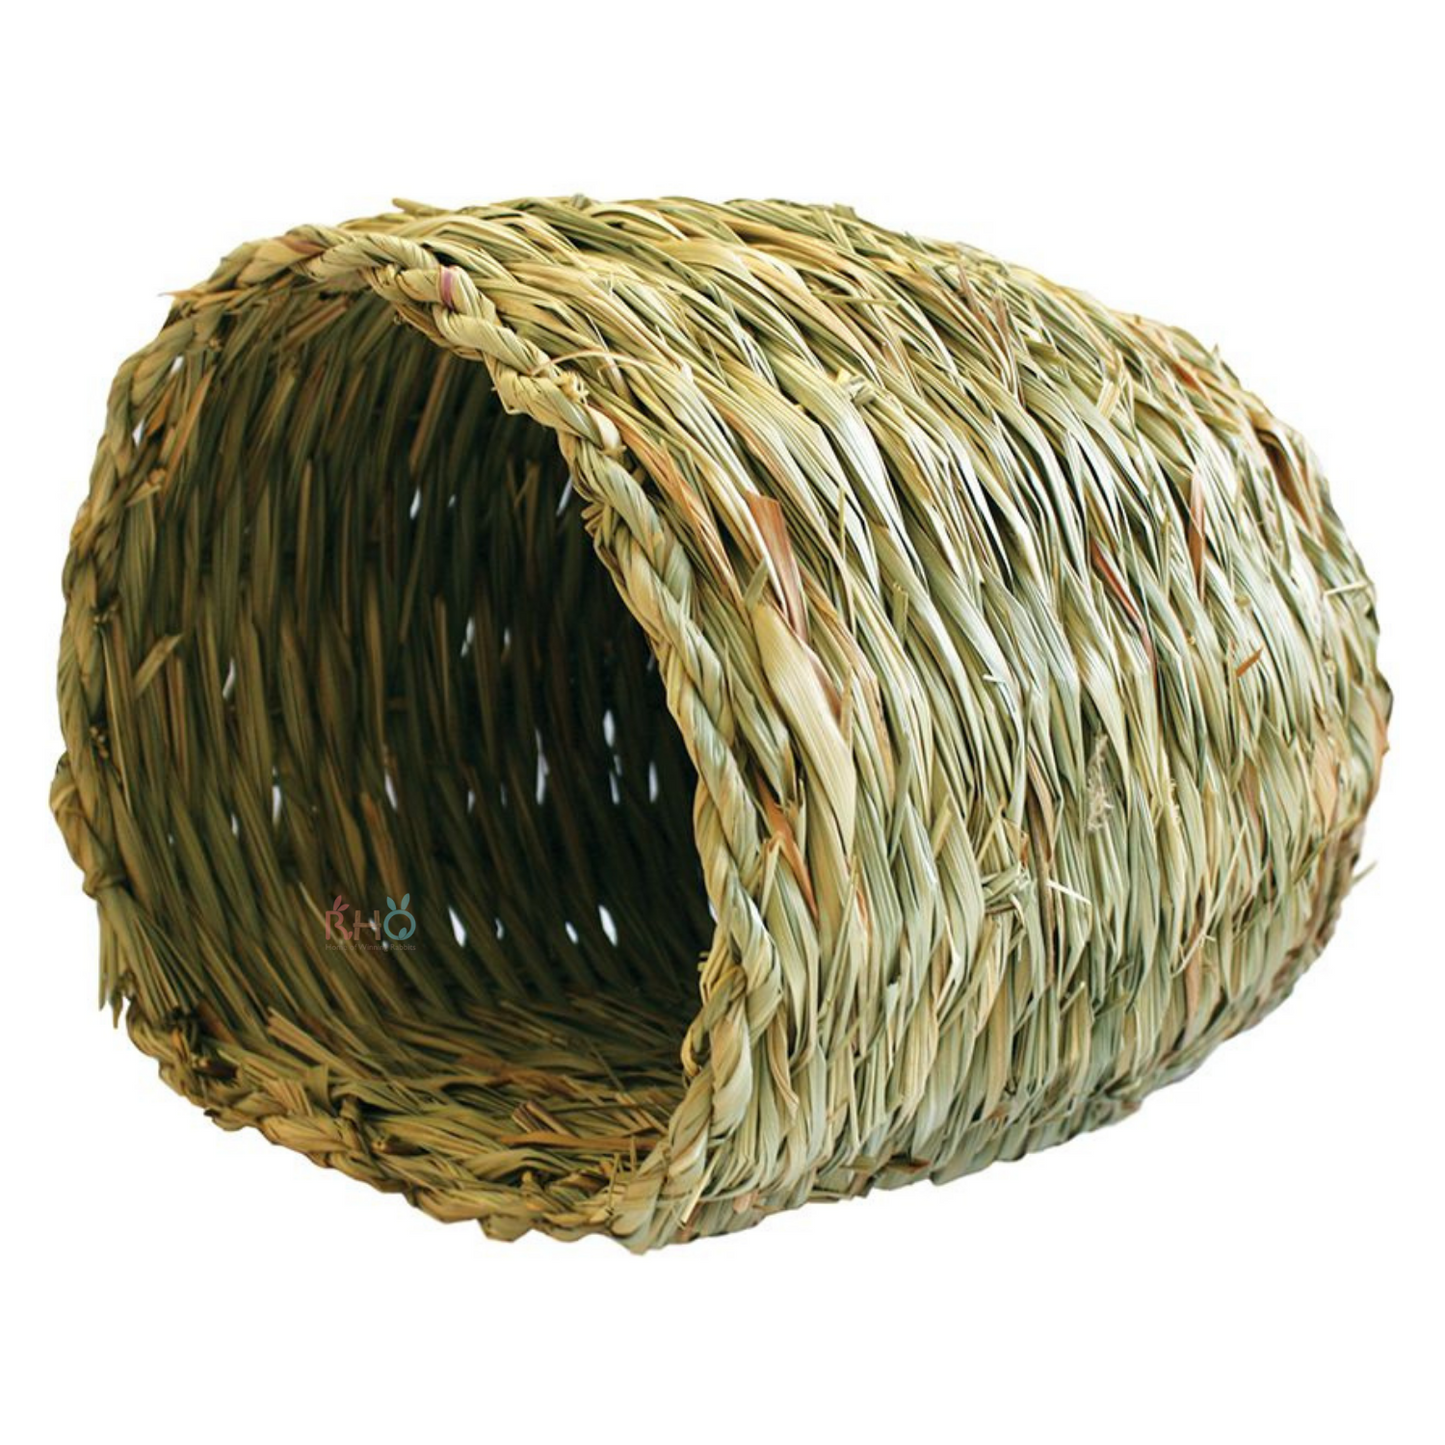 Happypet Nature First Grassy Nest (Large)